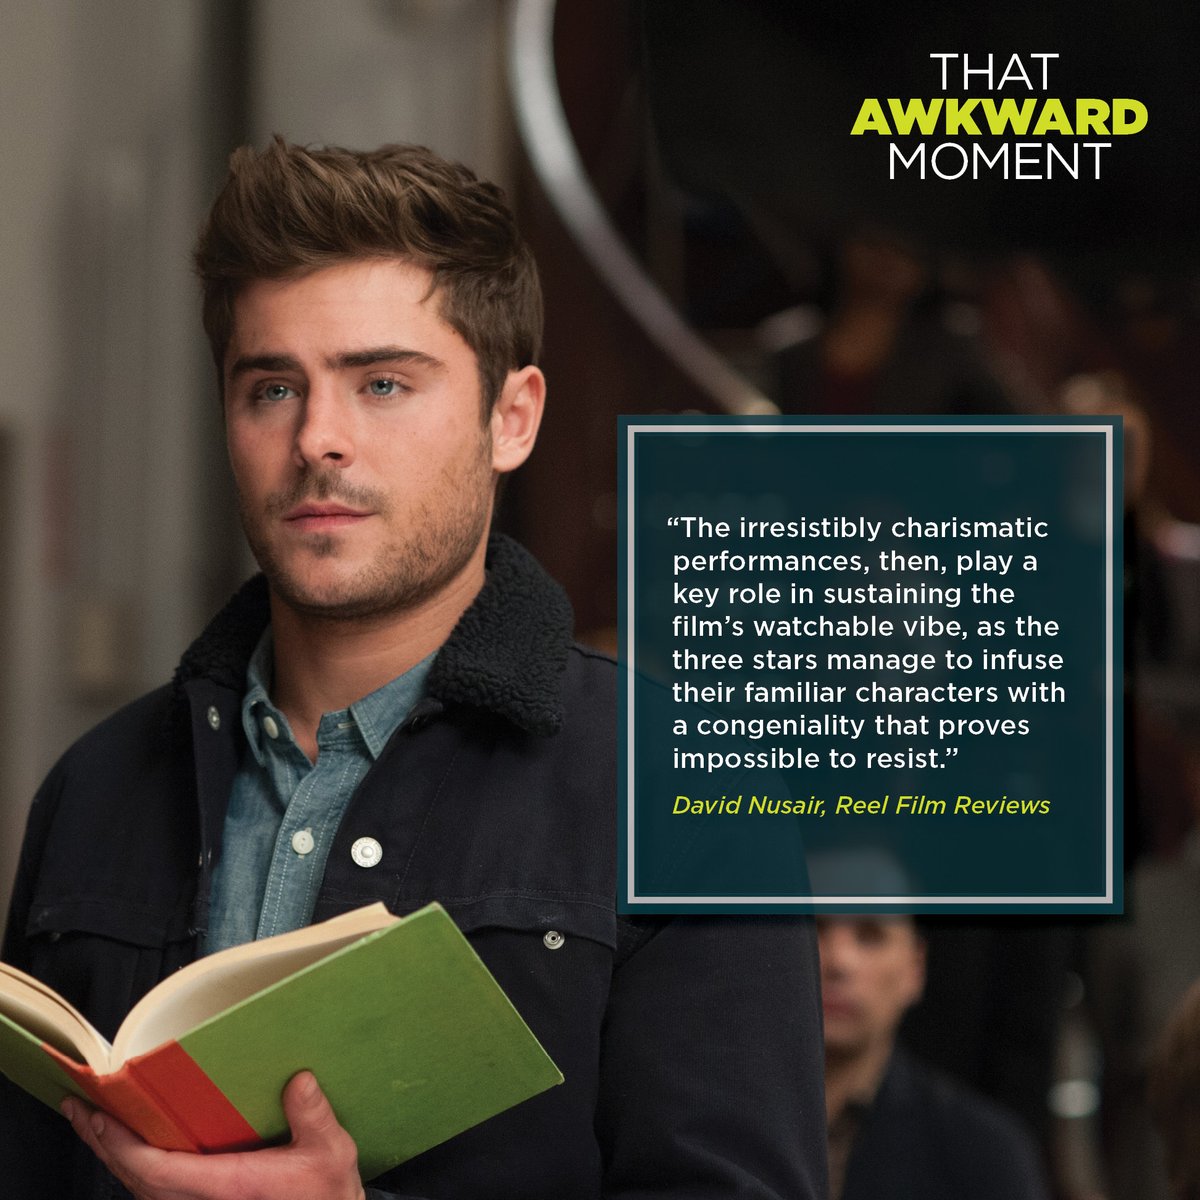 “The irresistibly charismatic performances, then, play a key role in sustaining the film’s watchable vibe, as the three stars manage to infuse their familiar characters with a congeniality that proves impossible to resist.”

#ThatAwkwardMoment #TAM #ZacEfron